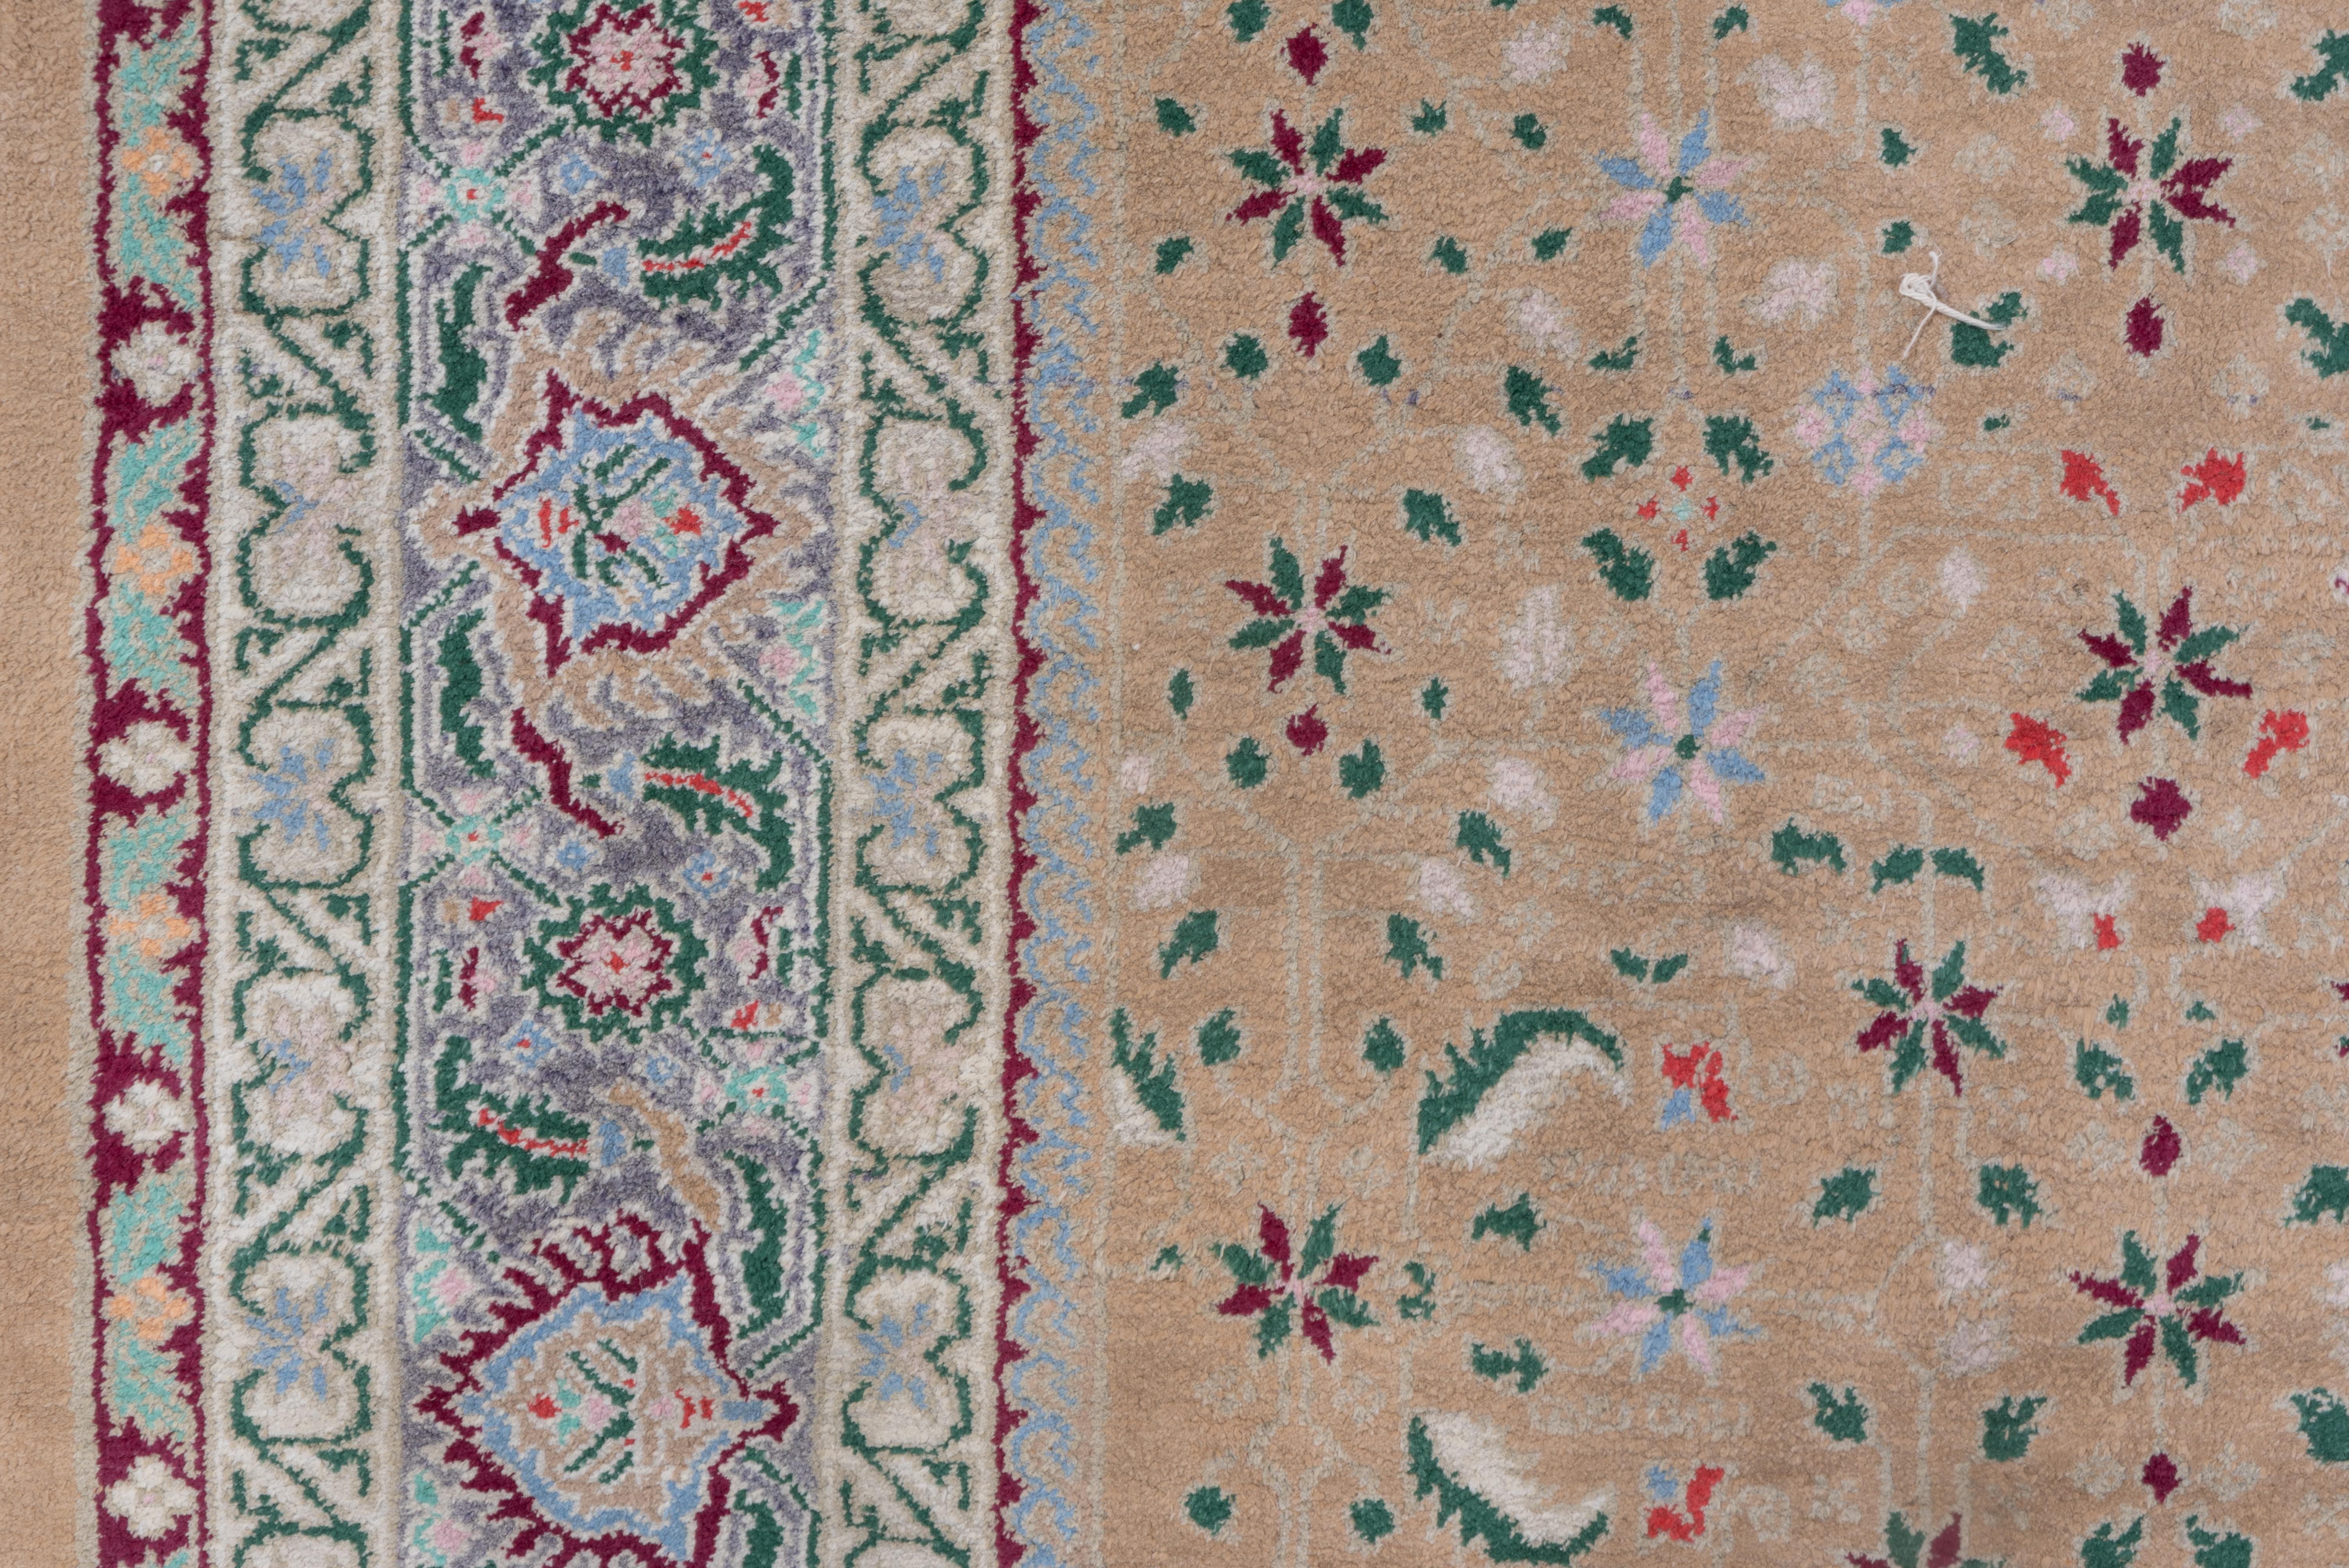 Wool Authentic Indian Agra Carpet, Full Pile, Beige Field, Gorgeous Border For Sale